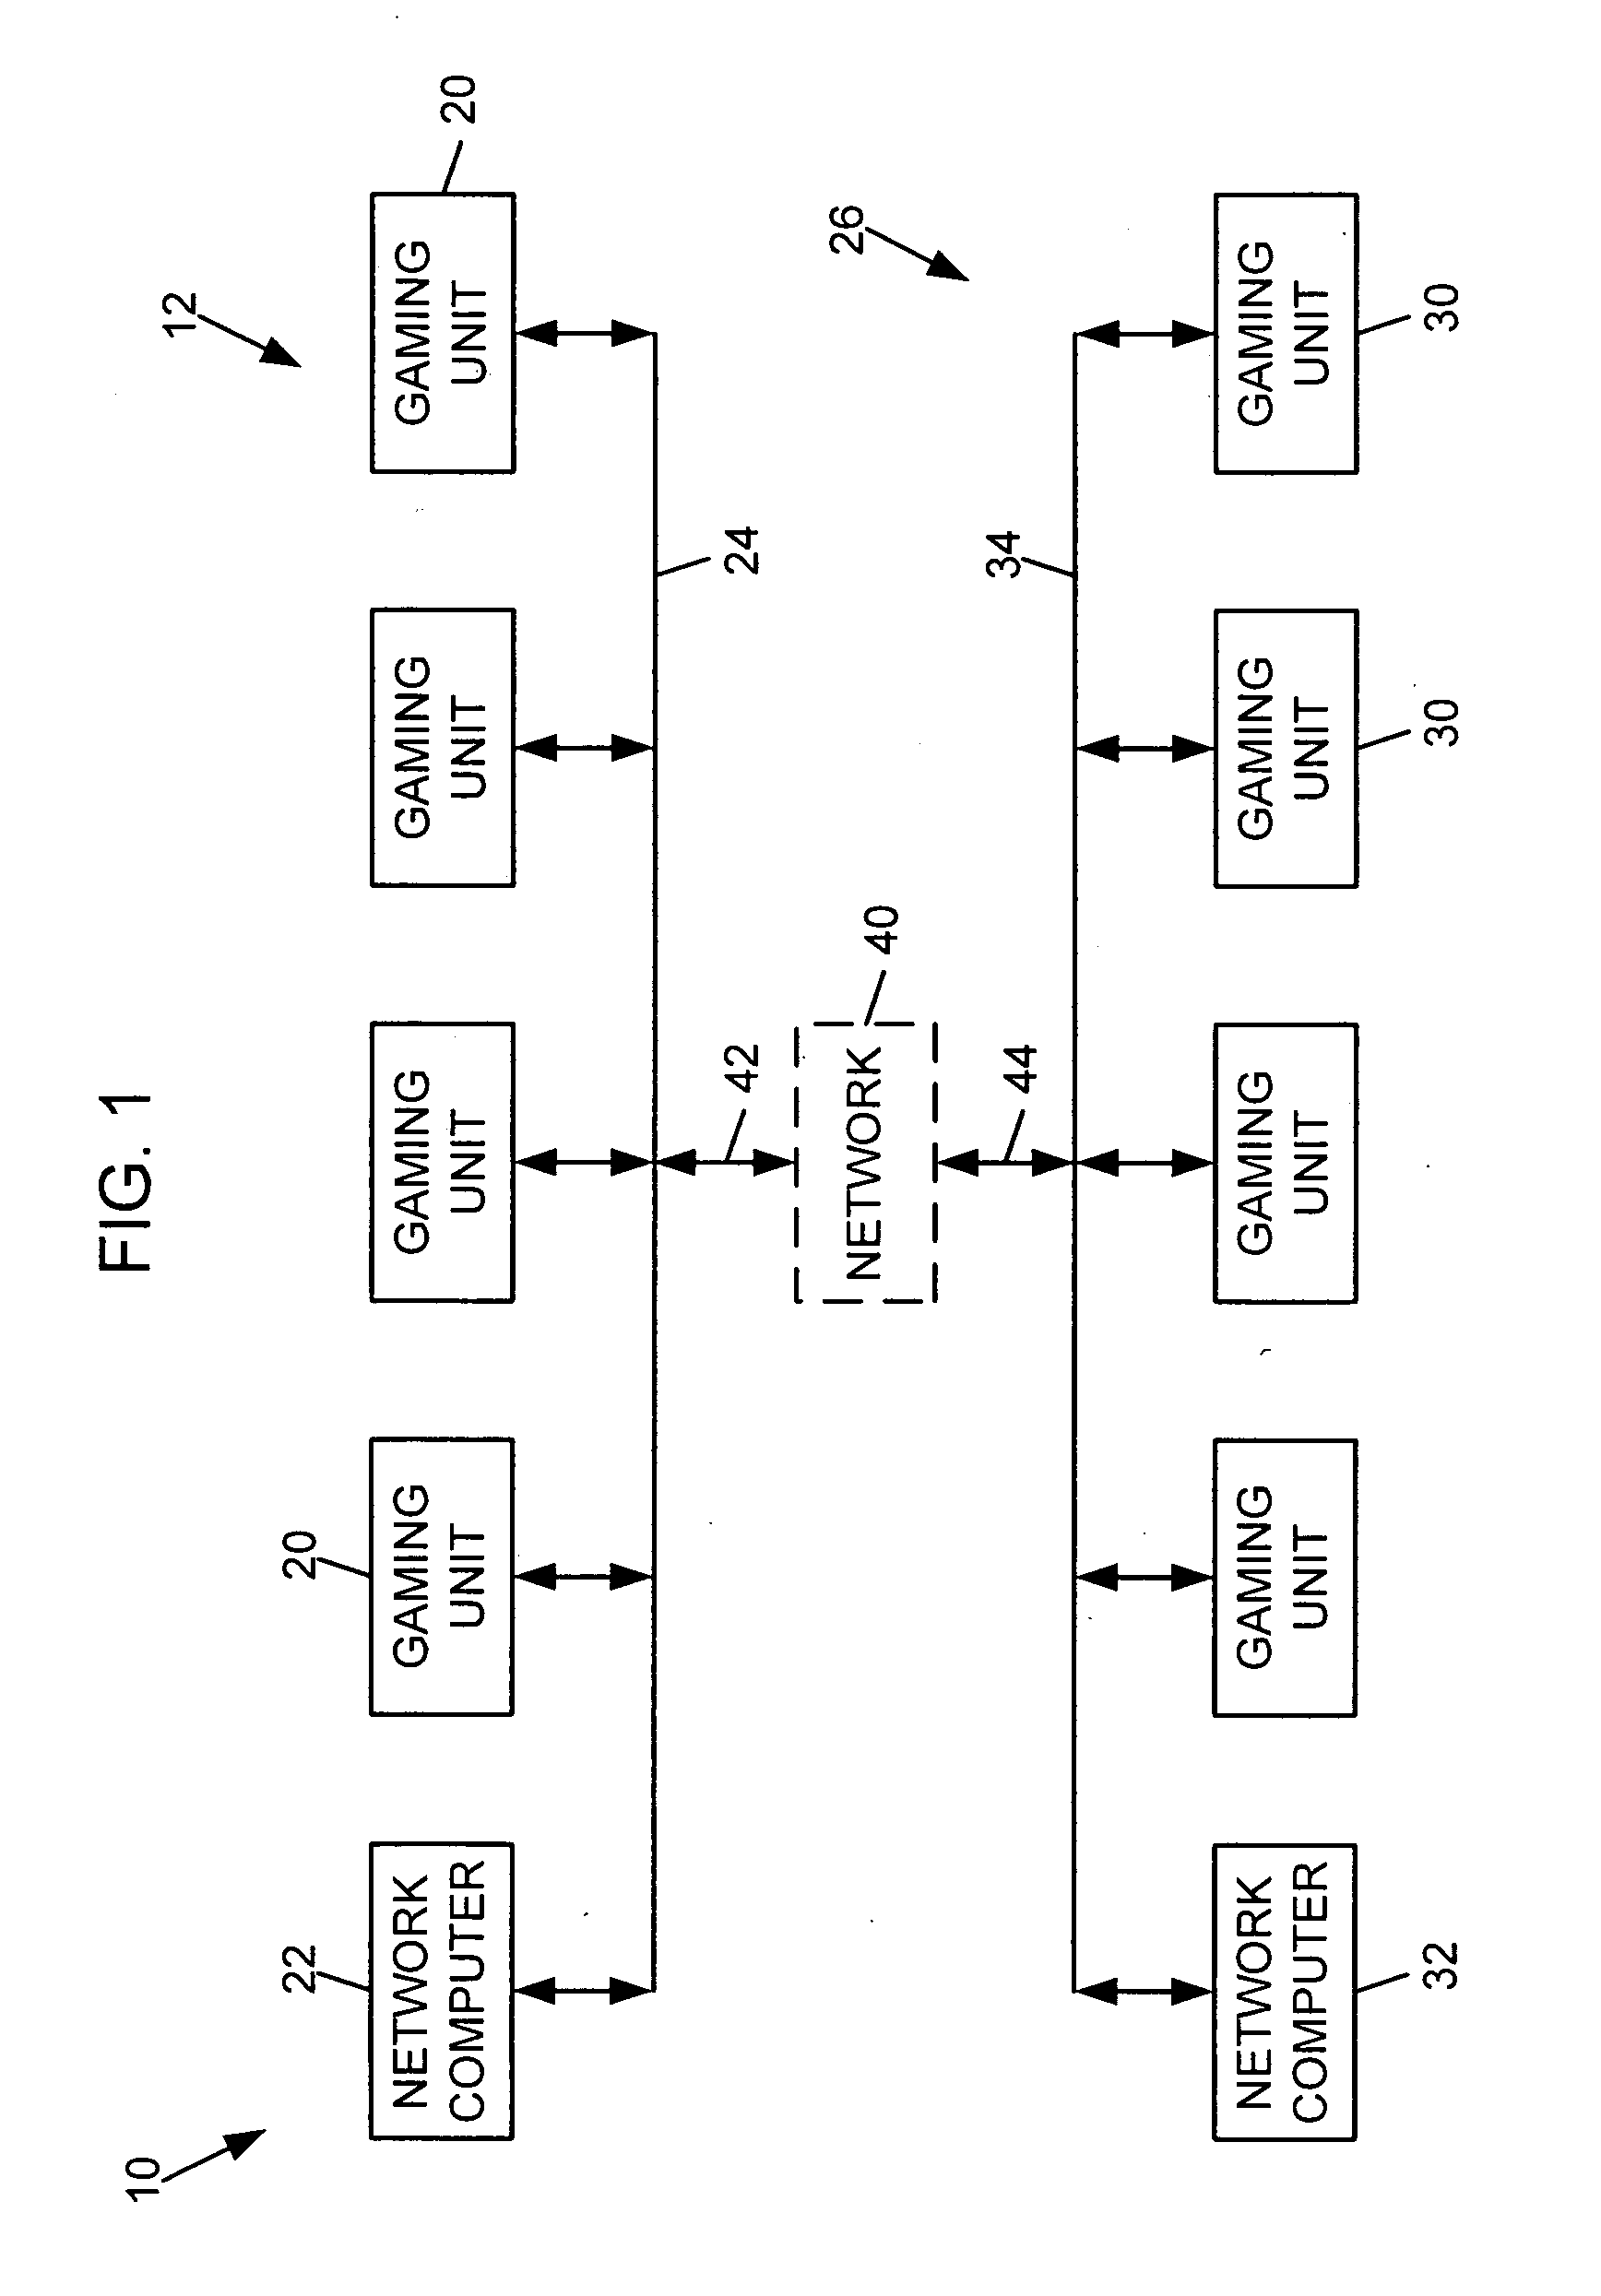 Method and apparatus for using a light valve to reduce the visibility of an object within a gaming apparatus